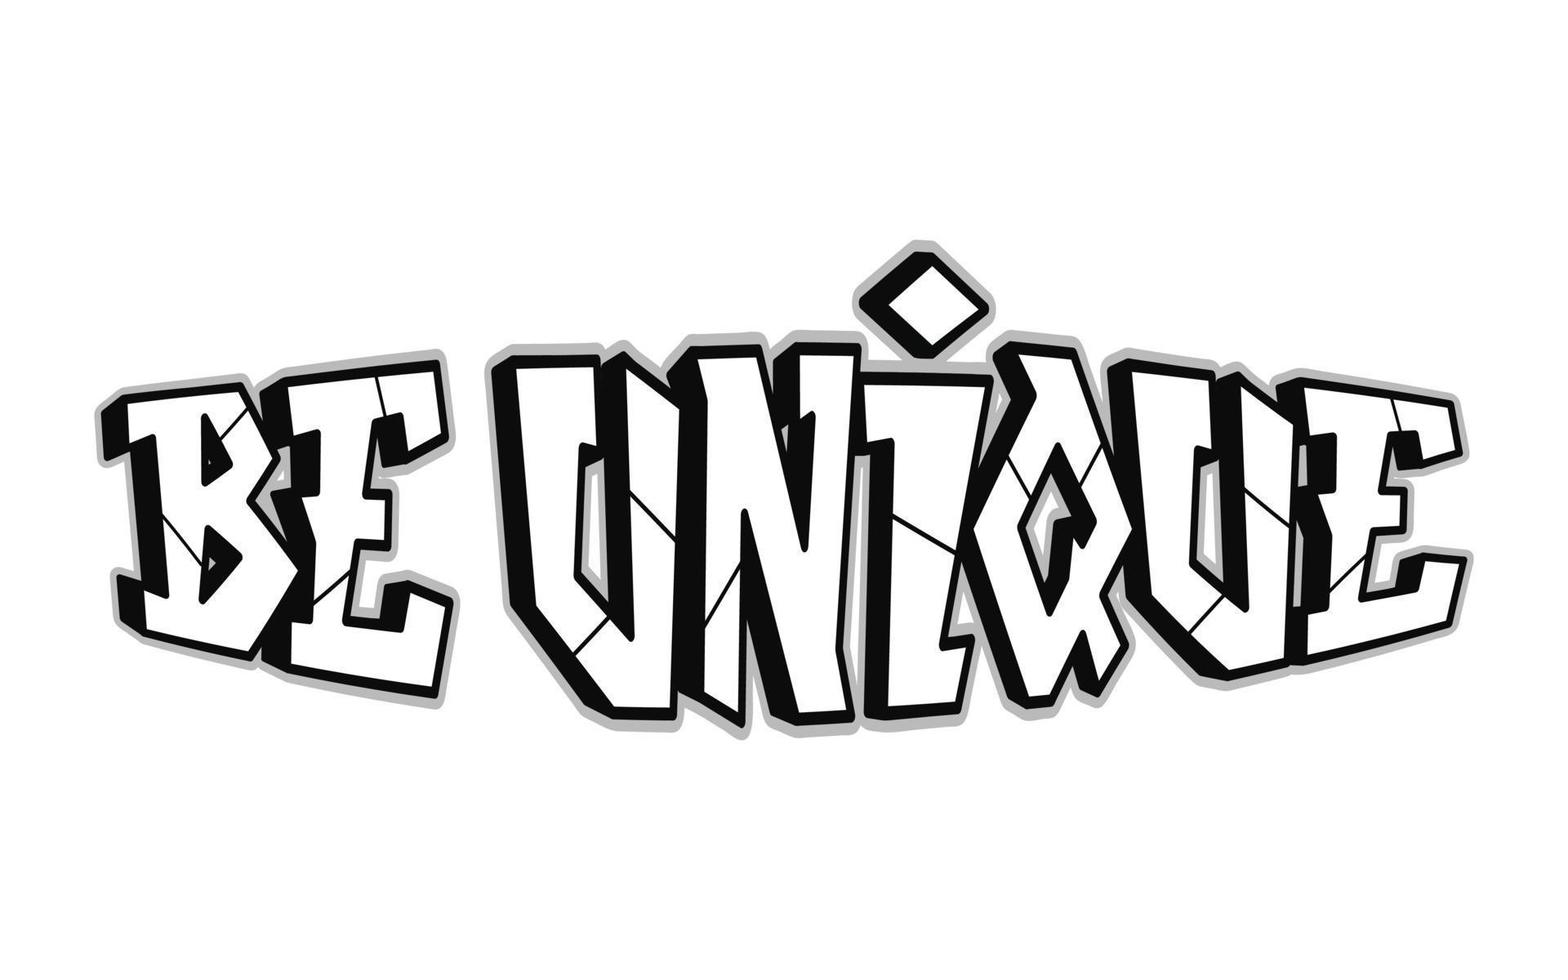 Be unique word trippy psychedelic graffiti style letters.Vector hand drawn doodle cartoon logo be unique illustration. Funny cool trippy letters, fashion, graffiti style print for t-shirt concept vector